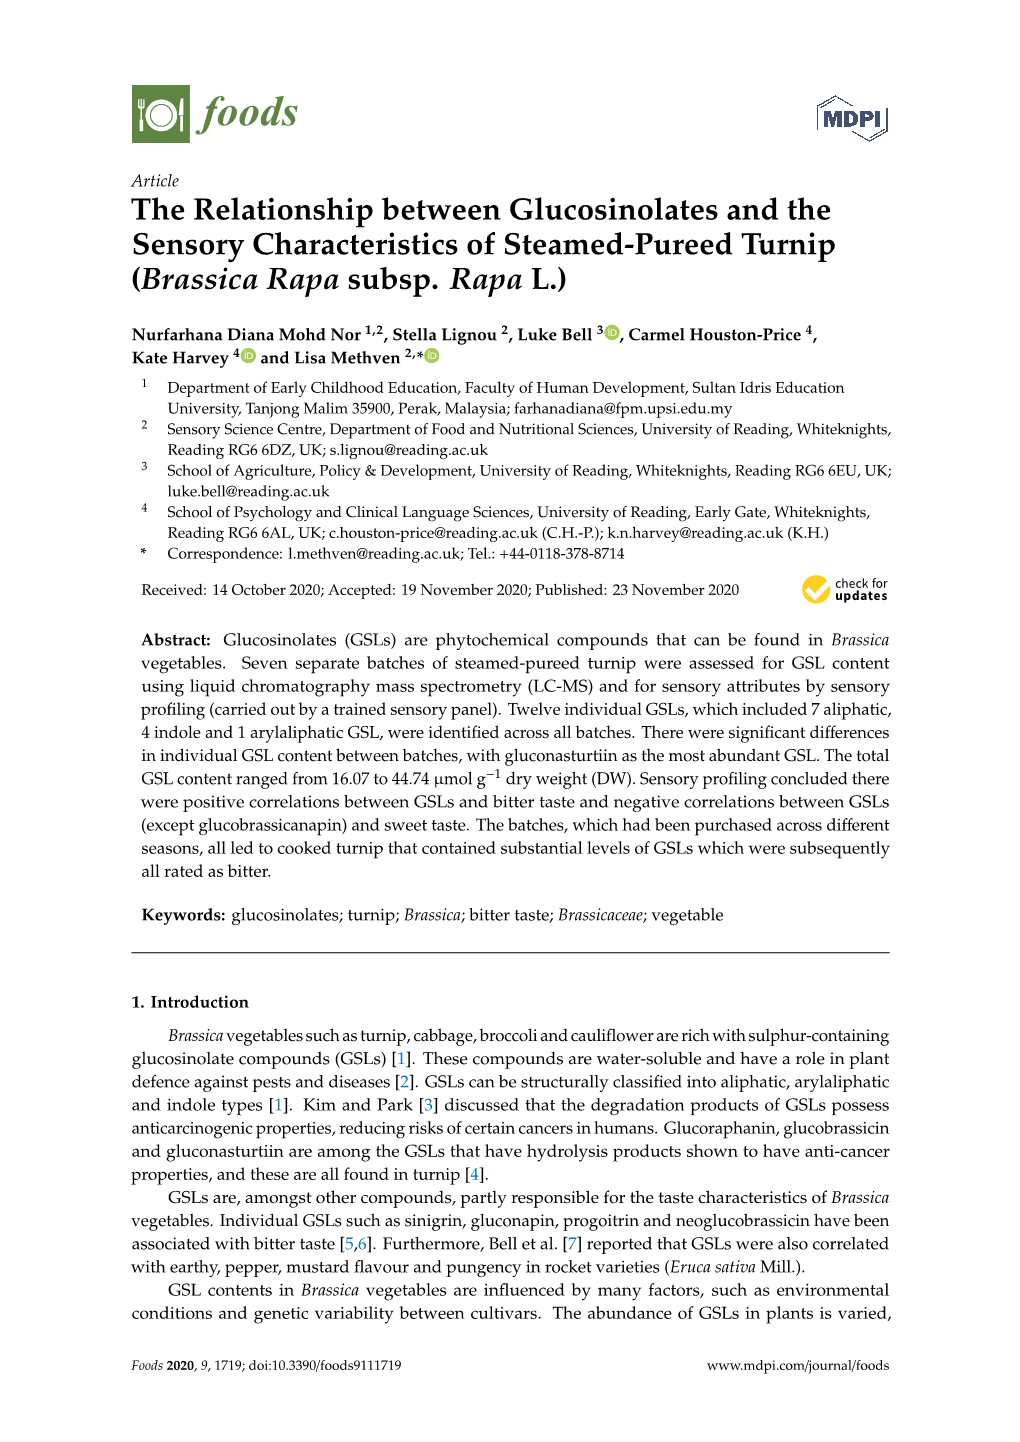 The Relationship Between Glucosinolates and the Sensory Characteristics of Steamed-Pureed Turnip (Brassica Rapa Subsp